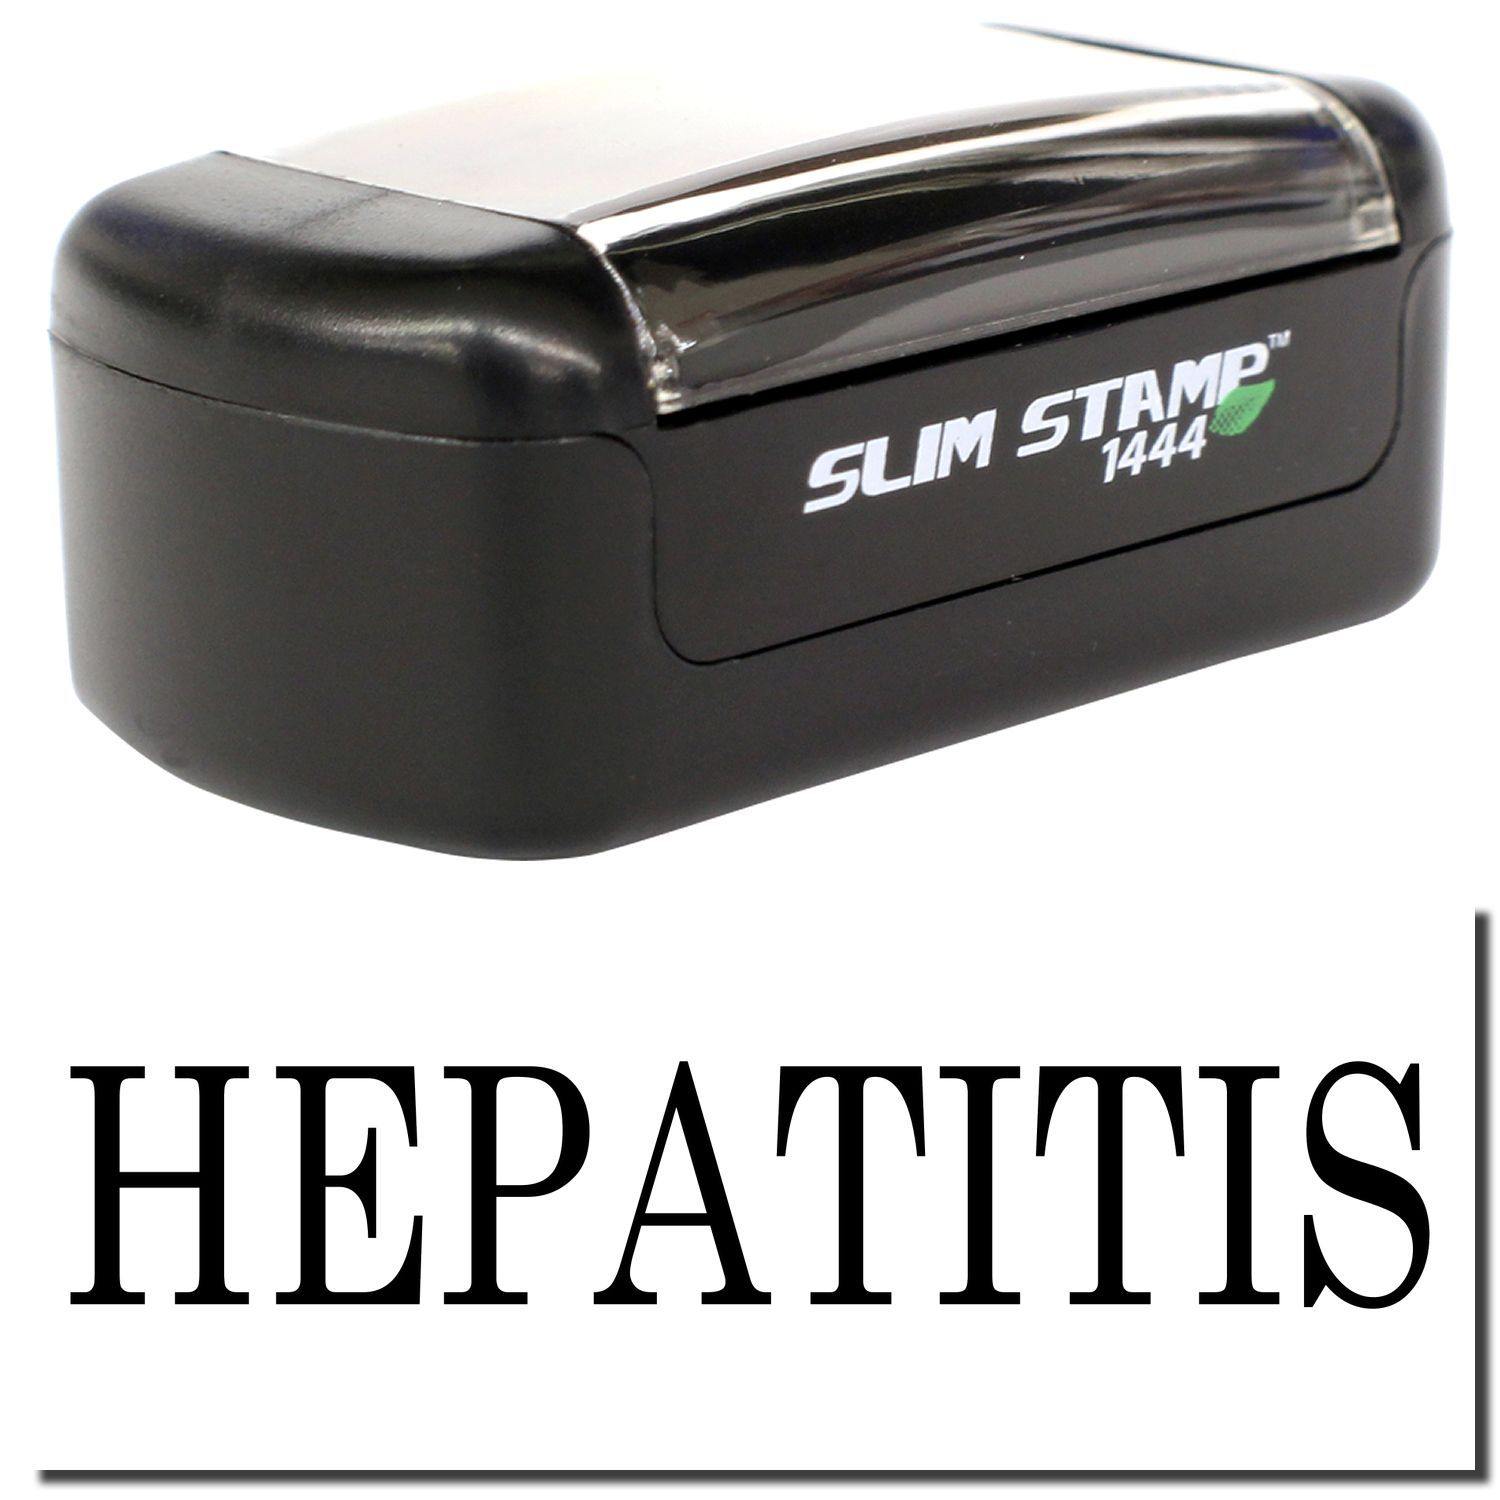 A stock office pre-inked stamp with a stamped image showing how the text "HEPATITIS" is displayed after stamping.